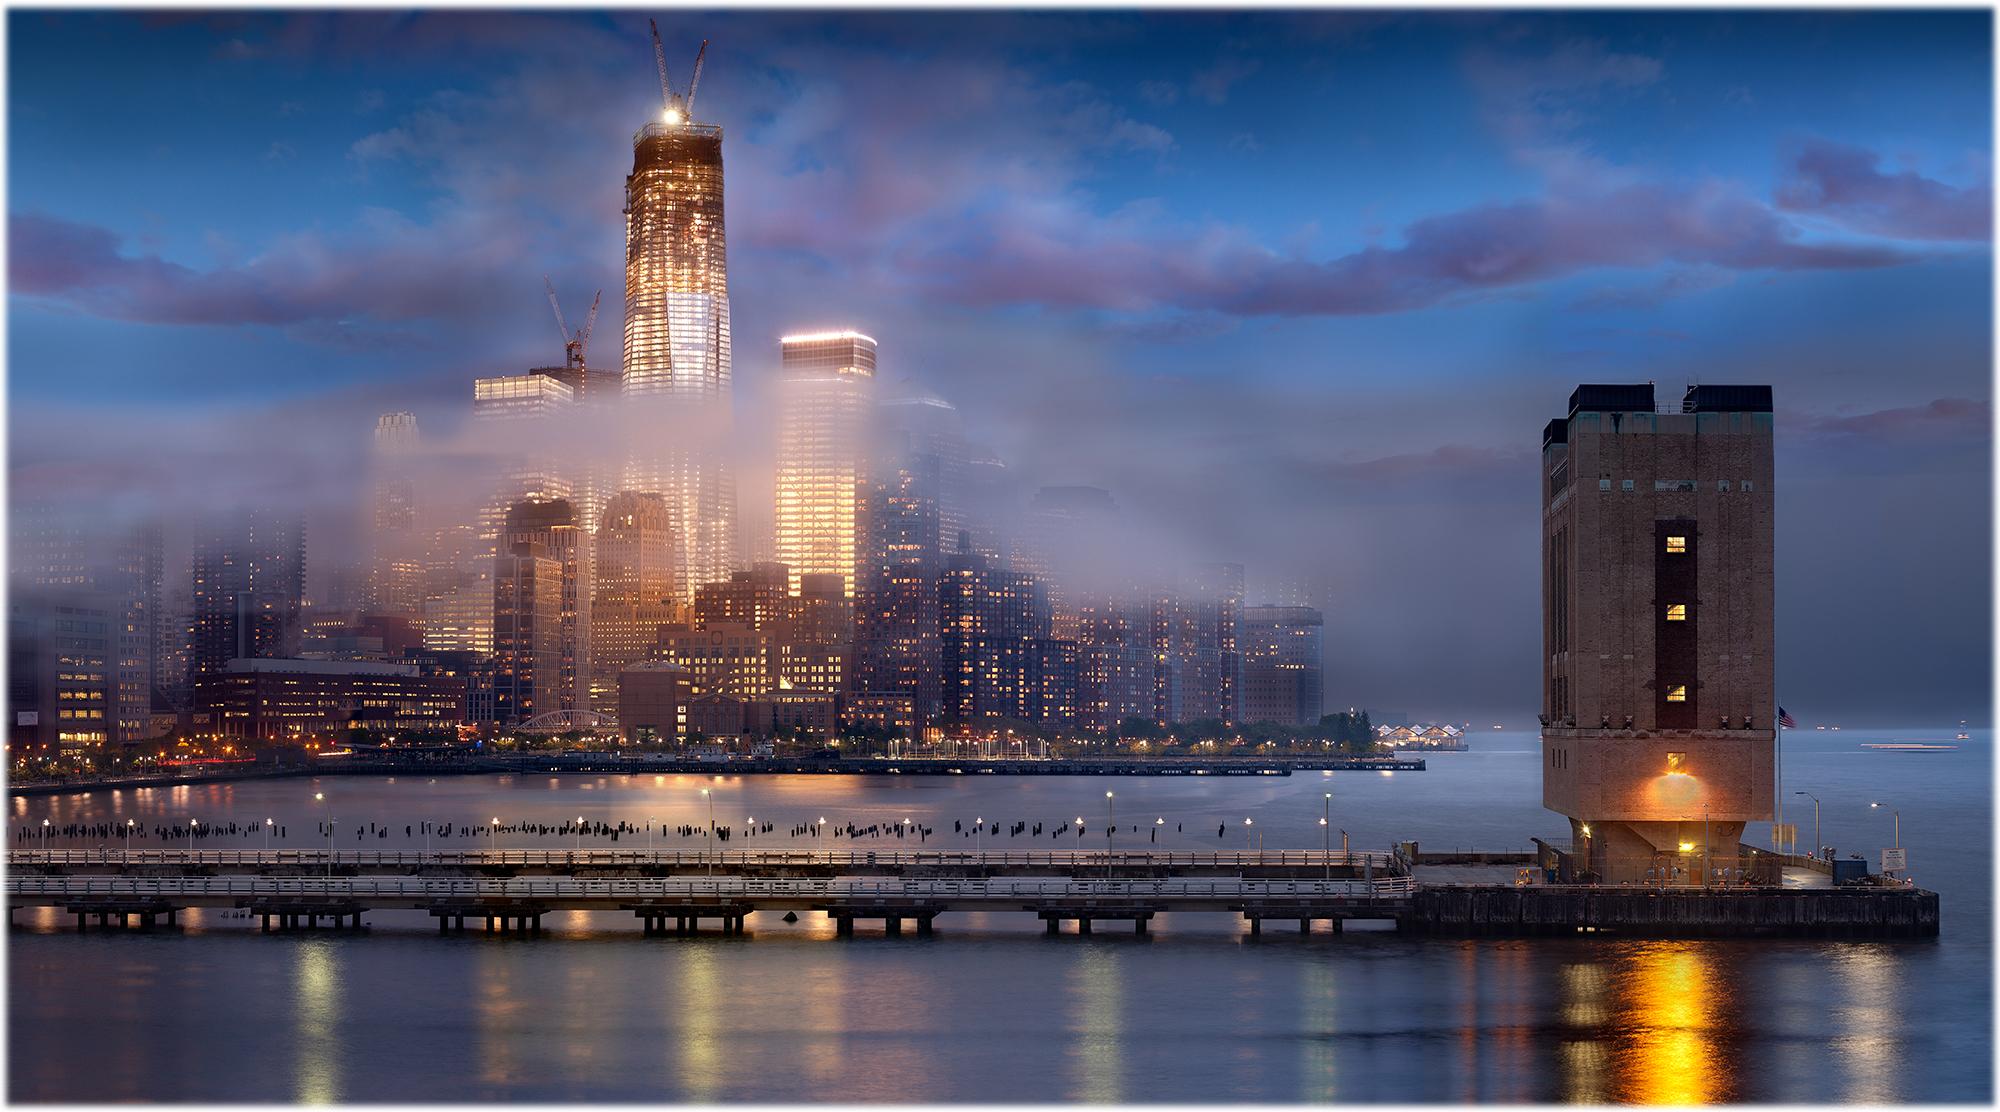 James Bleecker Color Photograph - One World Trade Center #11 (Freedom Tower at Night viewed from Downtown)